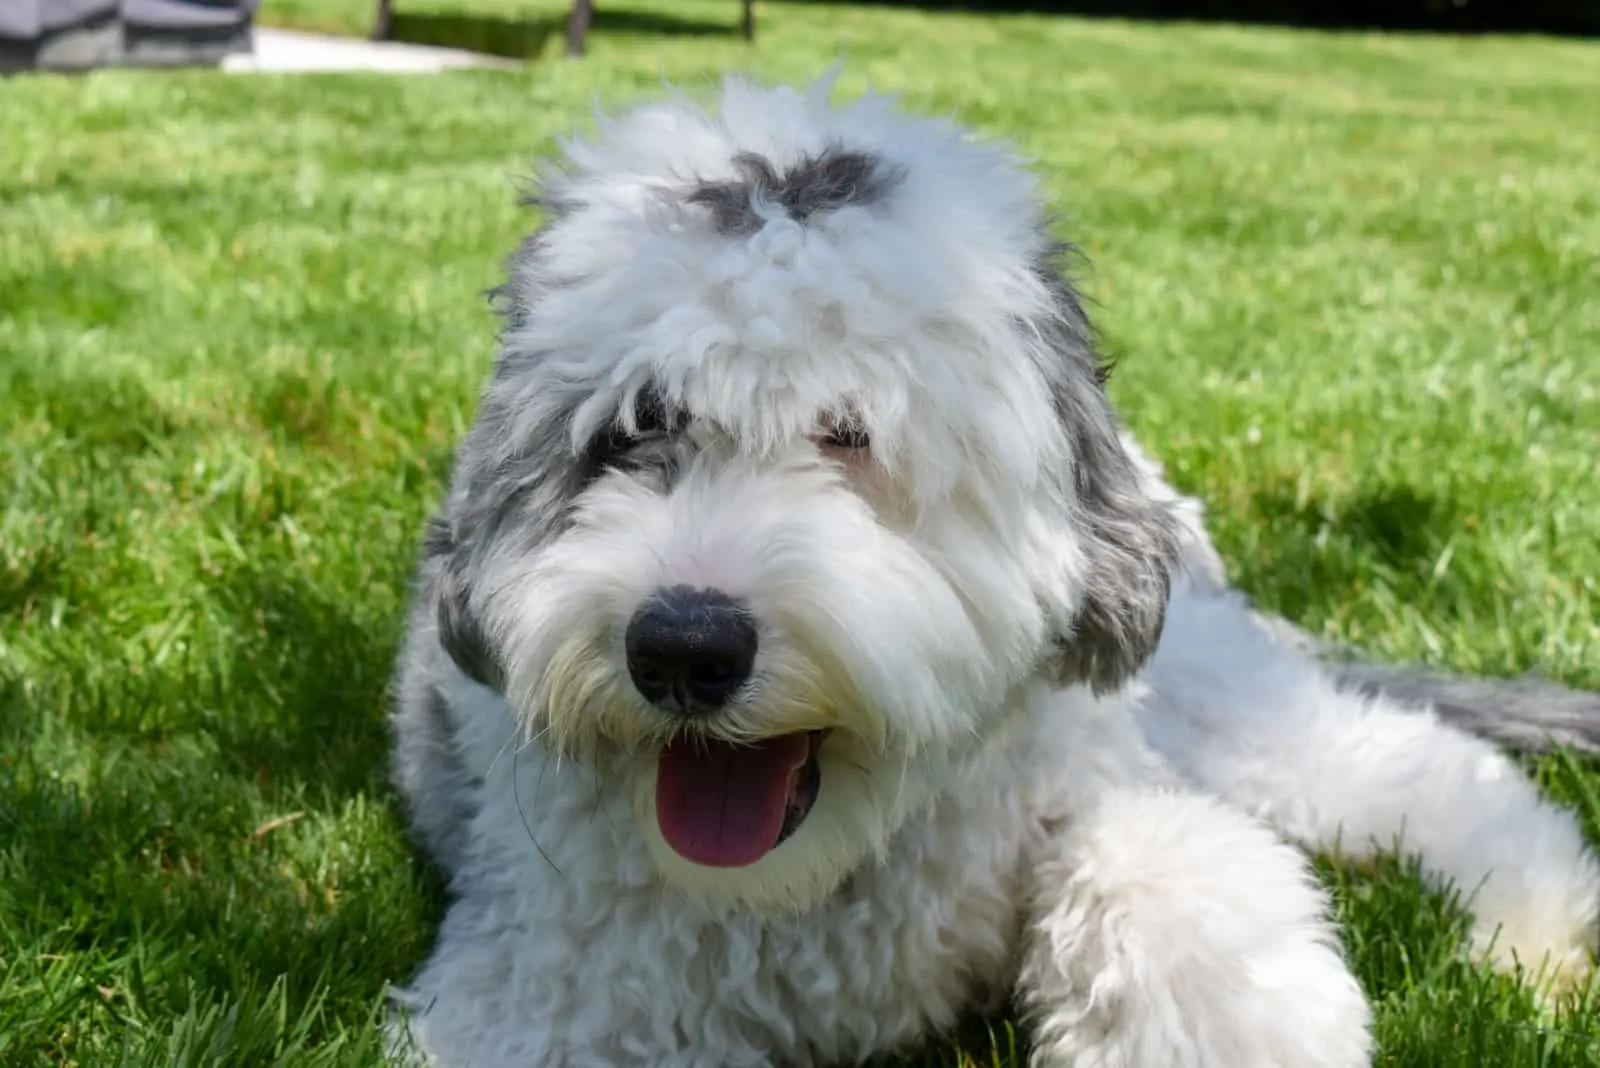 Sheepadoodle Puppy Dog outdoors